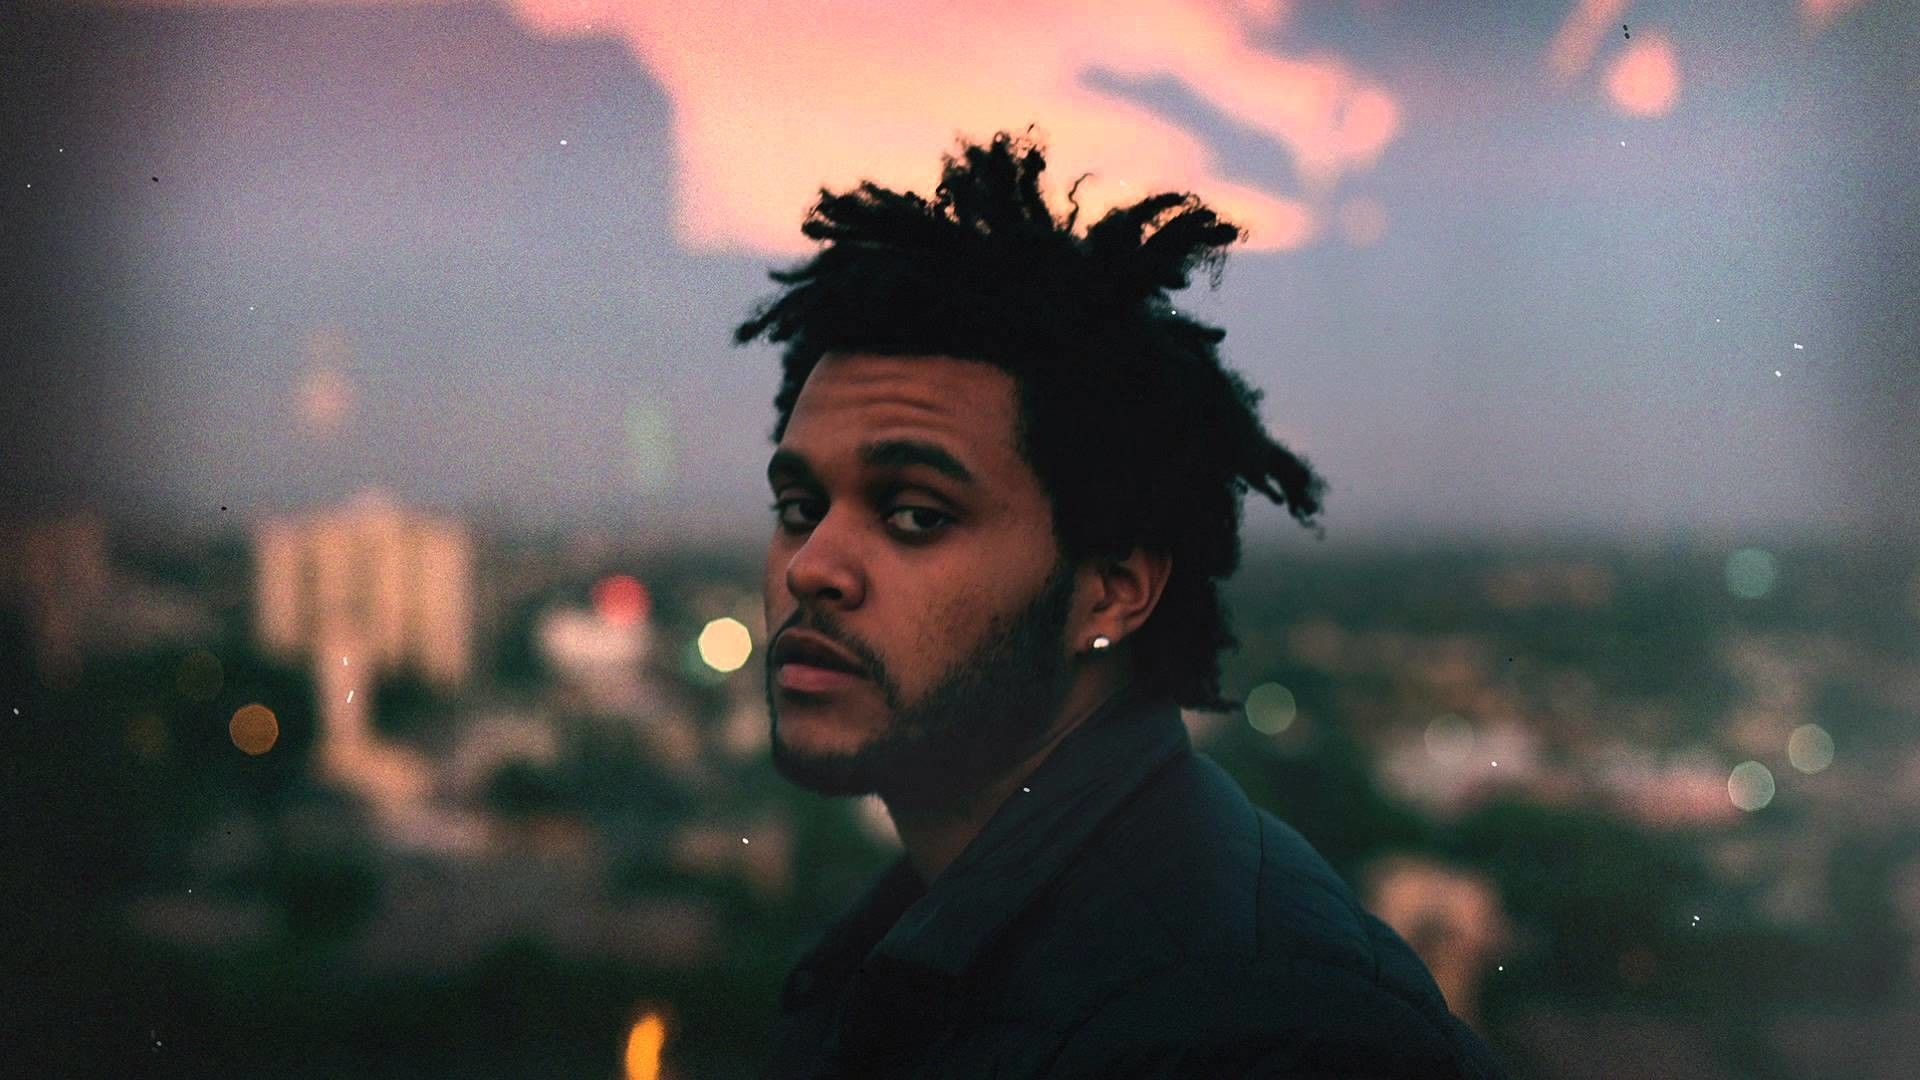 A man with dreadlocks is looking at the camera - The Weeknd